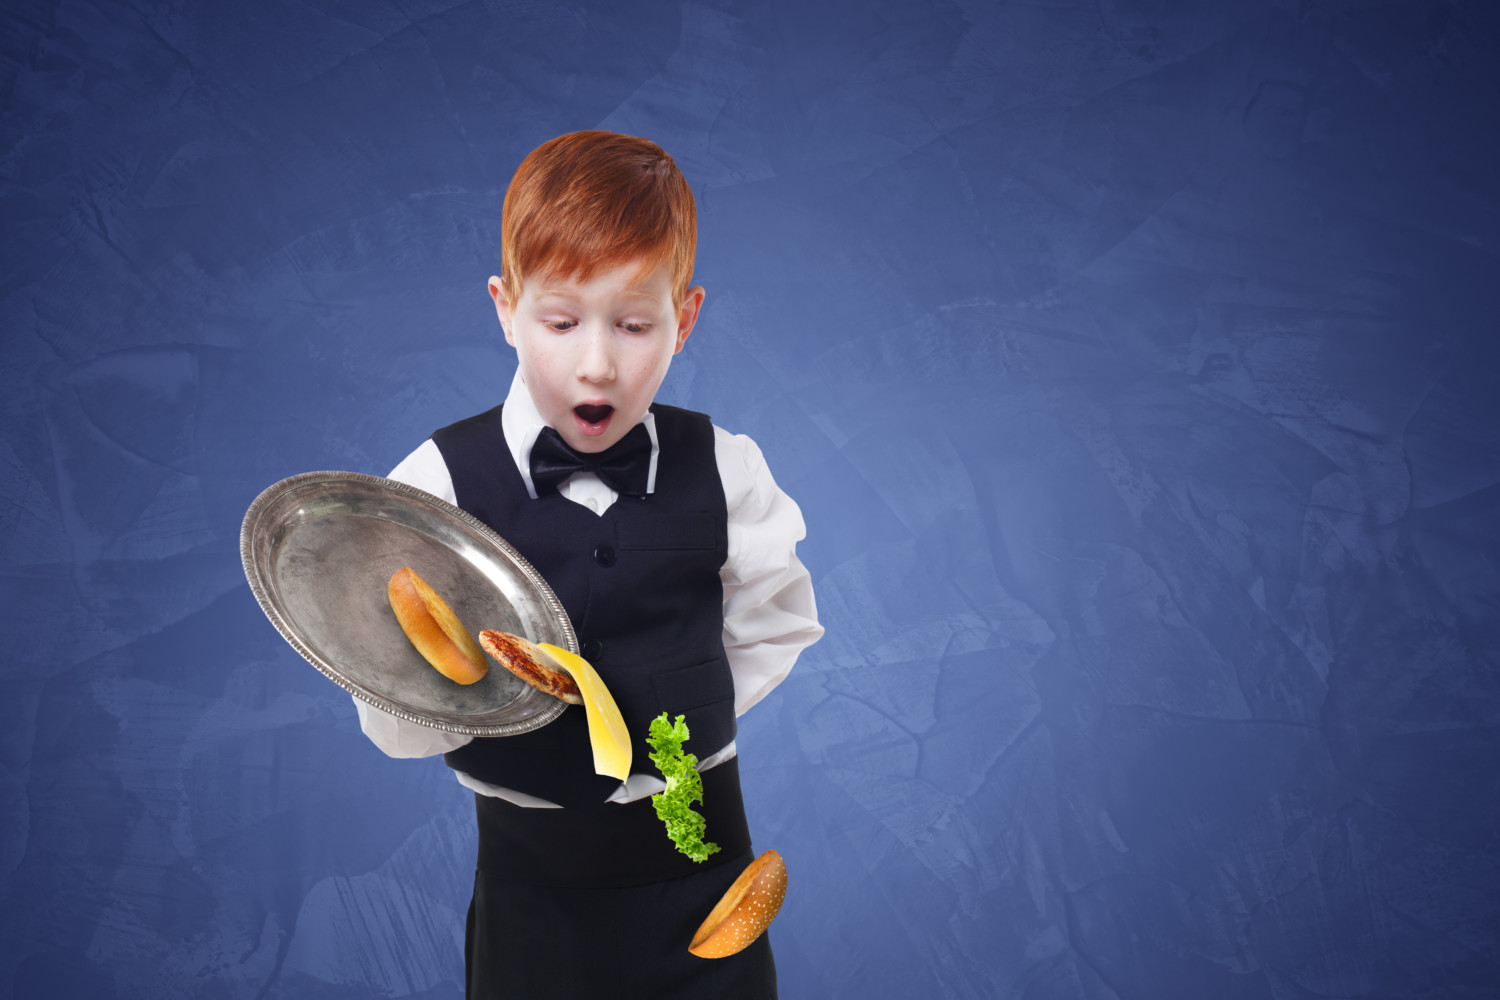 Clumsy little waiter drops food from tray serving hamburger. Cheeseburger falling with separated toppings. Dropping burger layers. Redhead child boy in suit, failure at blue background